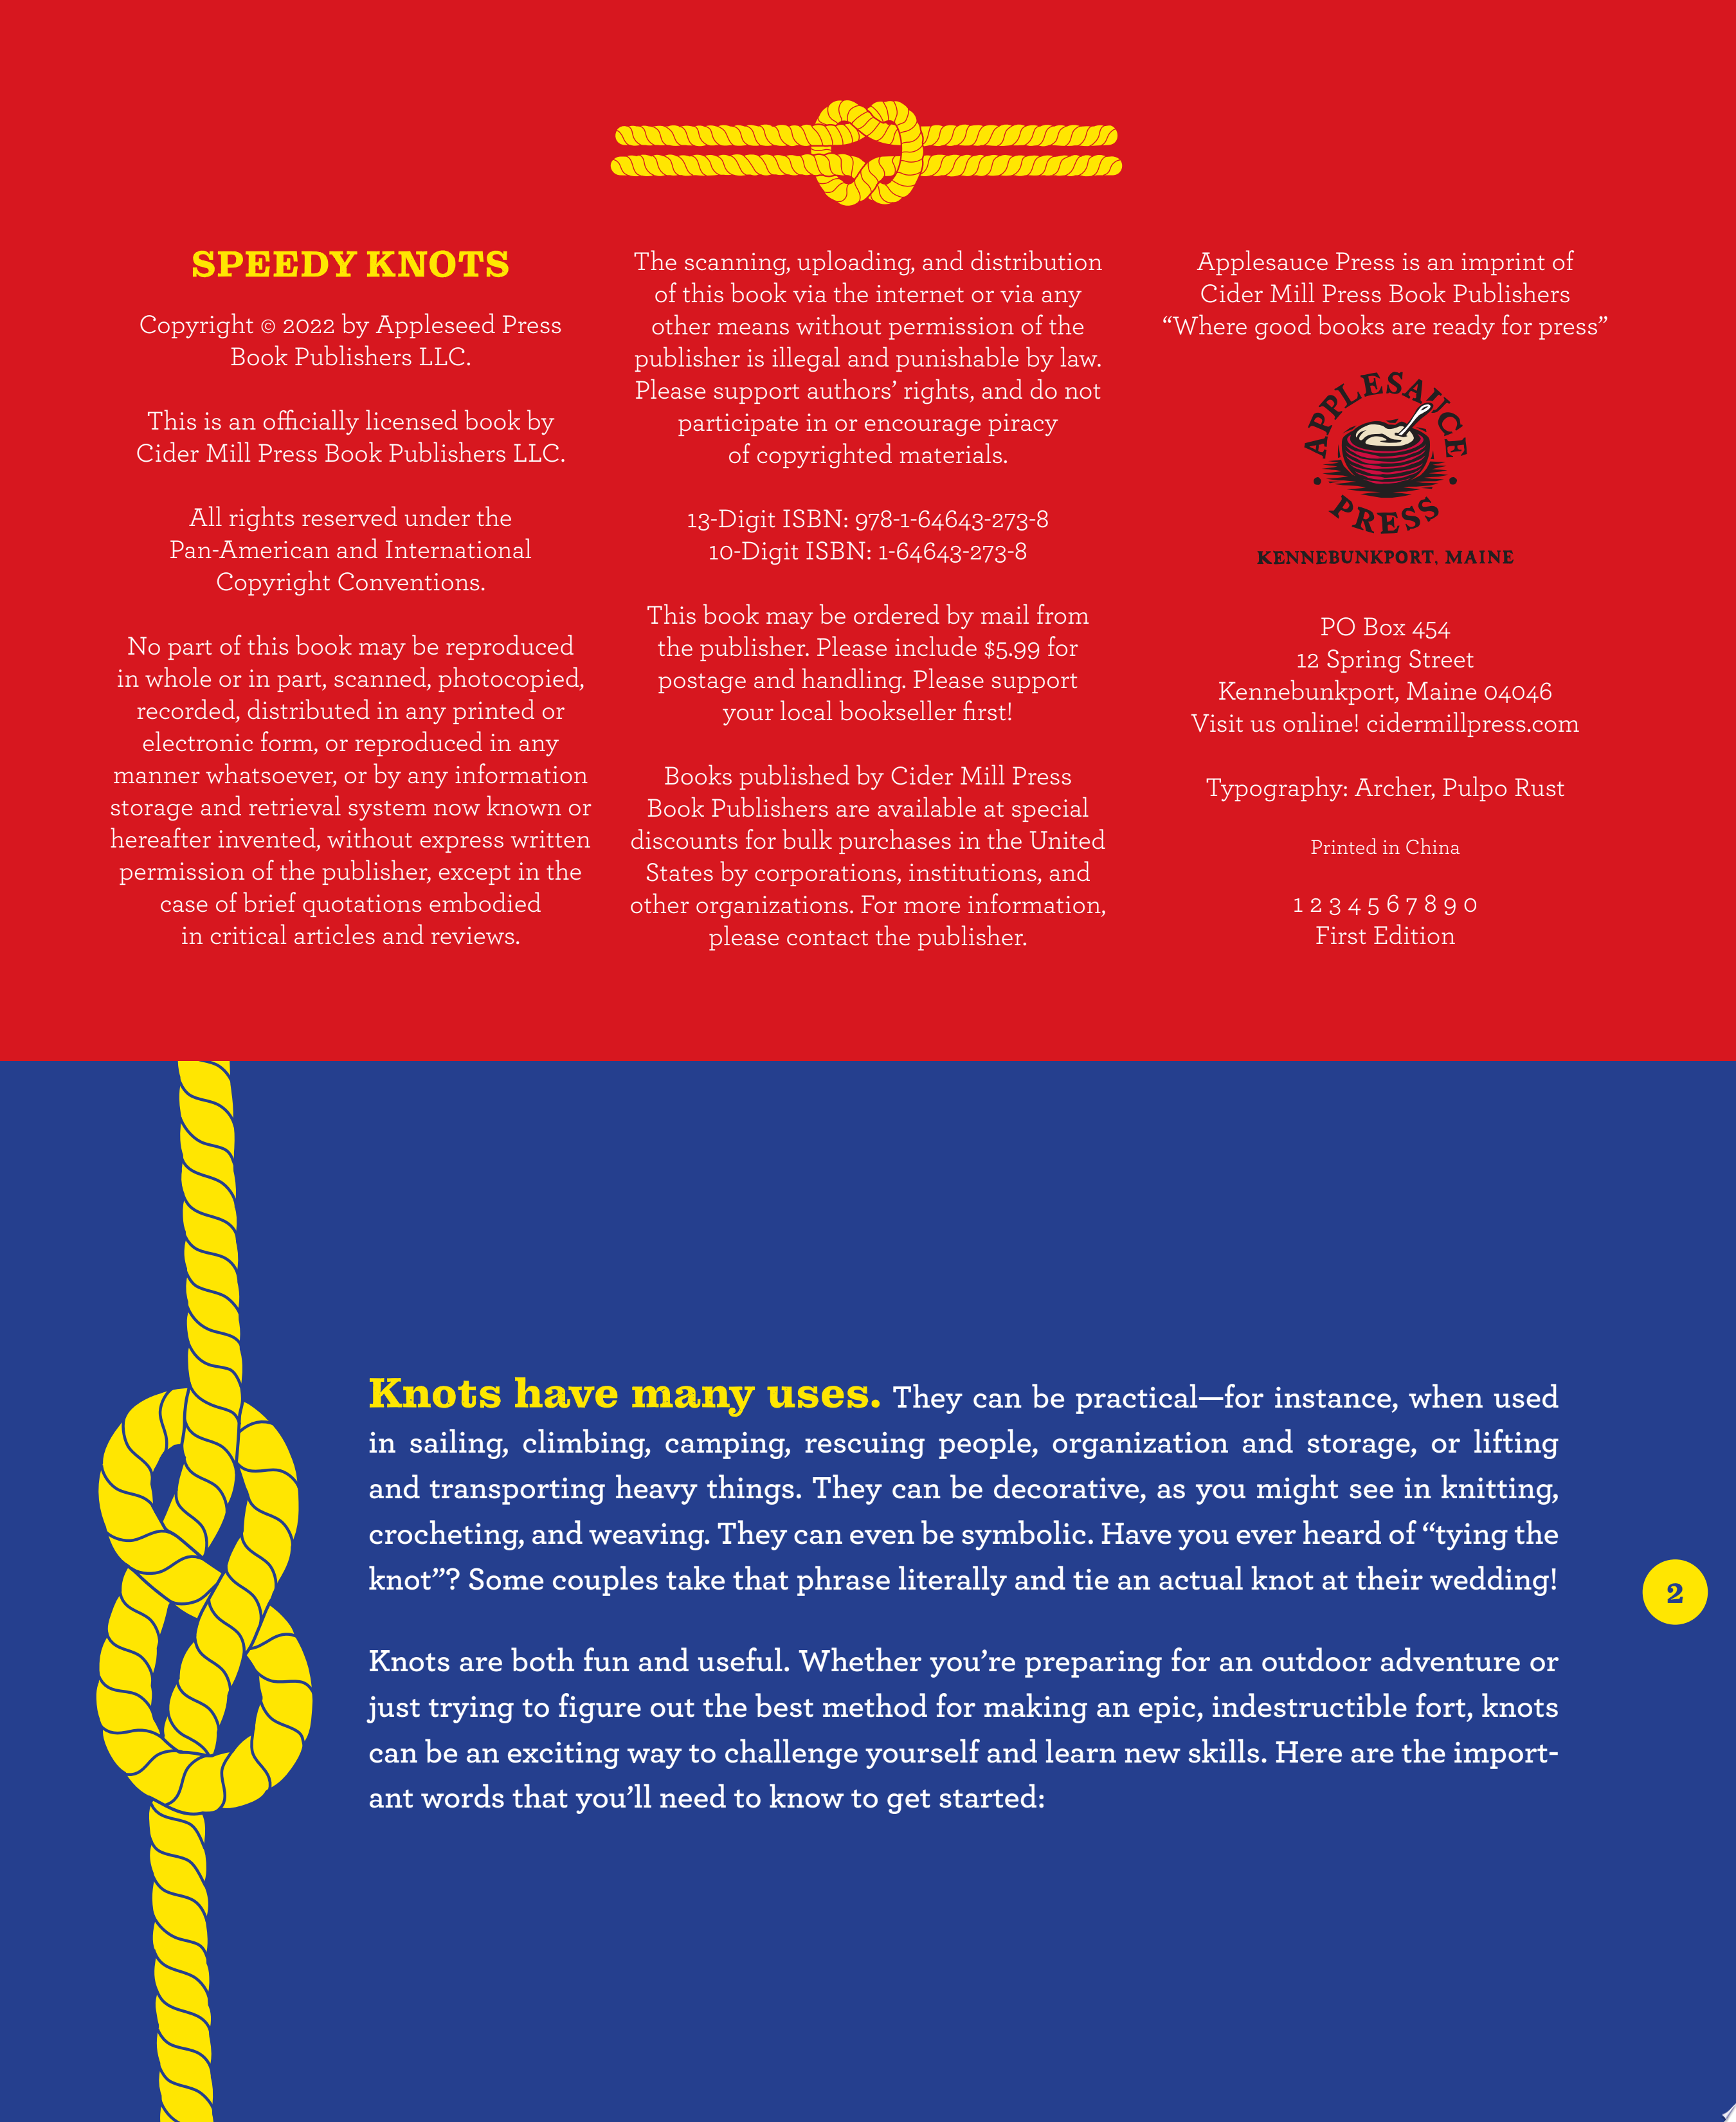 The Best Books for Learning Knots